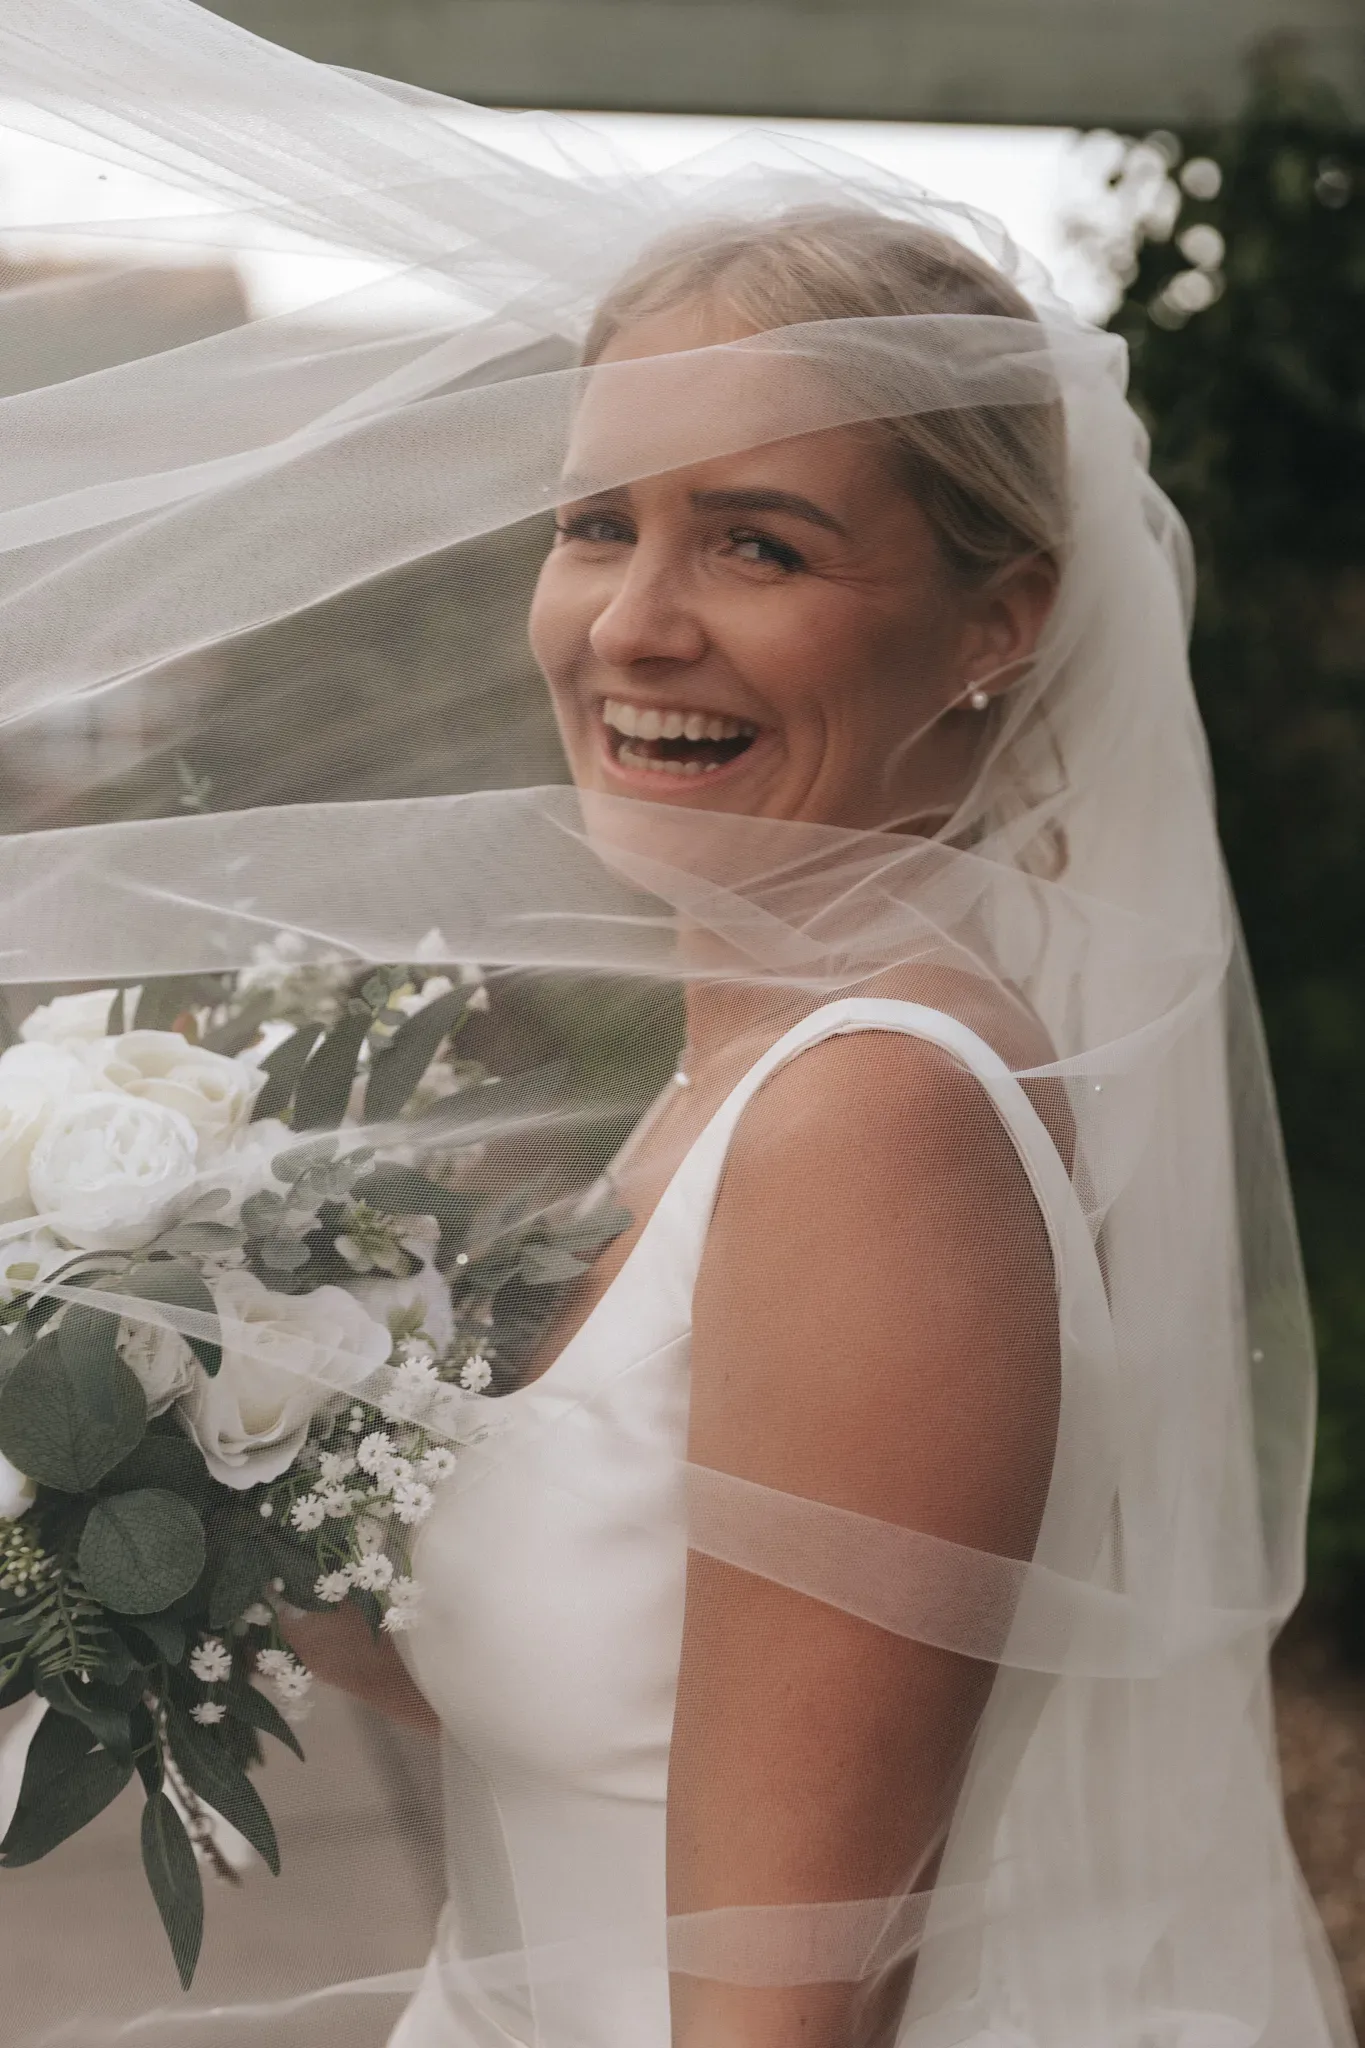 A joyful bride with blonde hair, covered by a translucent veil, smiles broadly, holding a bouquet of white flowers and greenery. she is wearing a white sleeveless dress, with soft, natural light illuminating her.